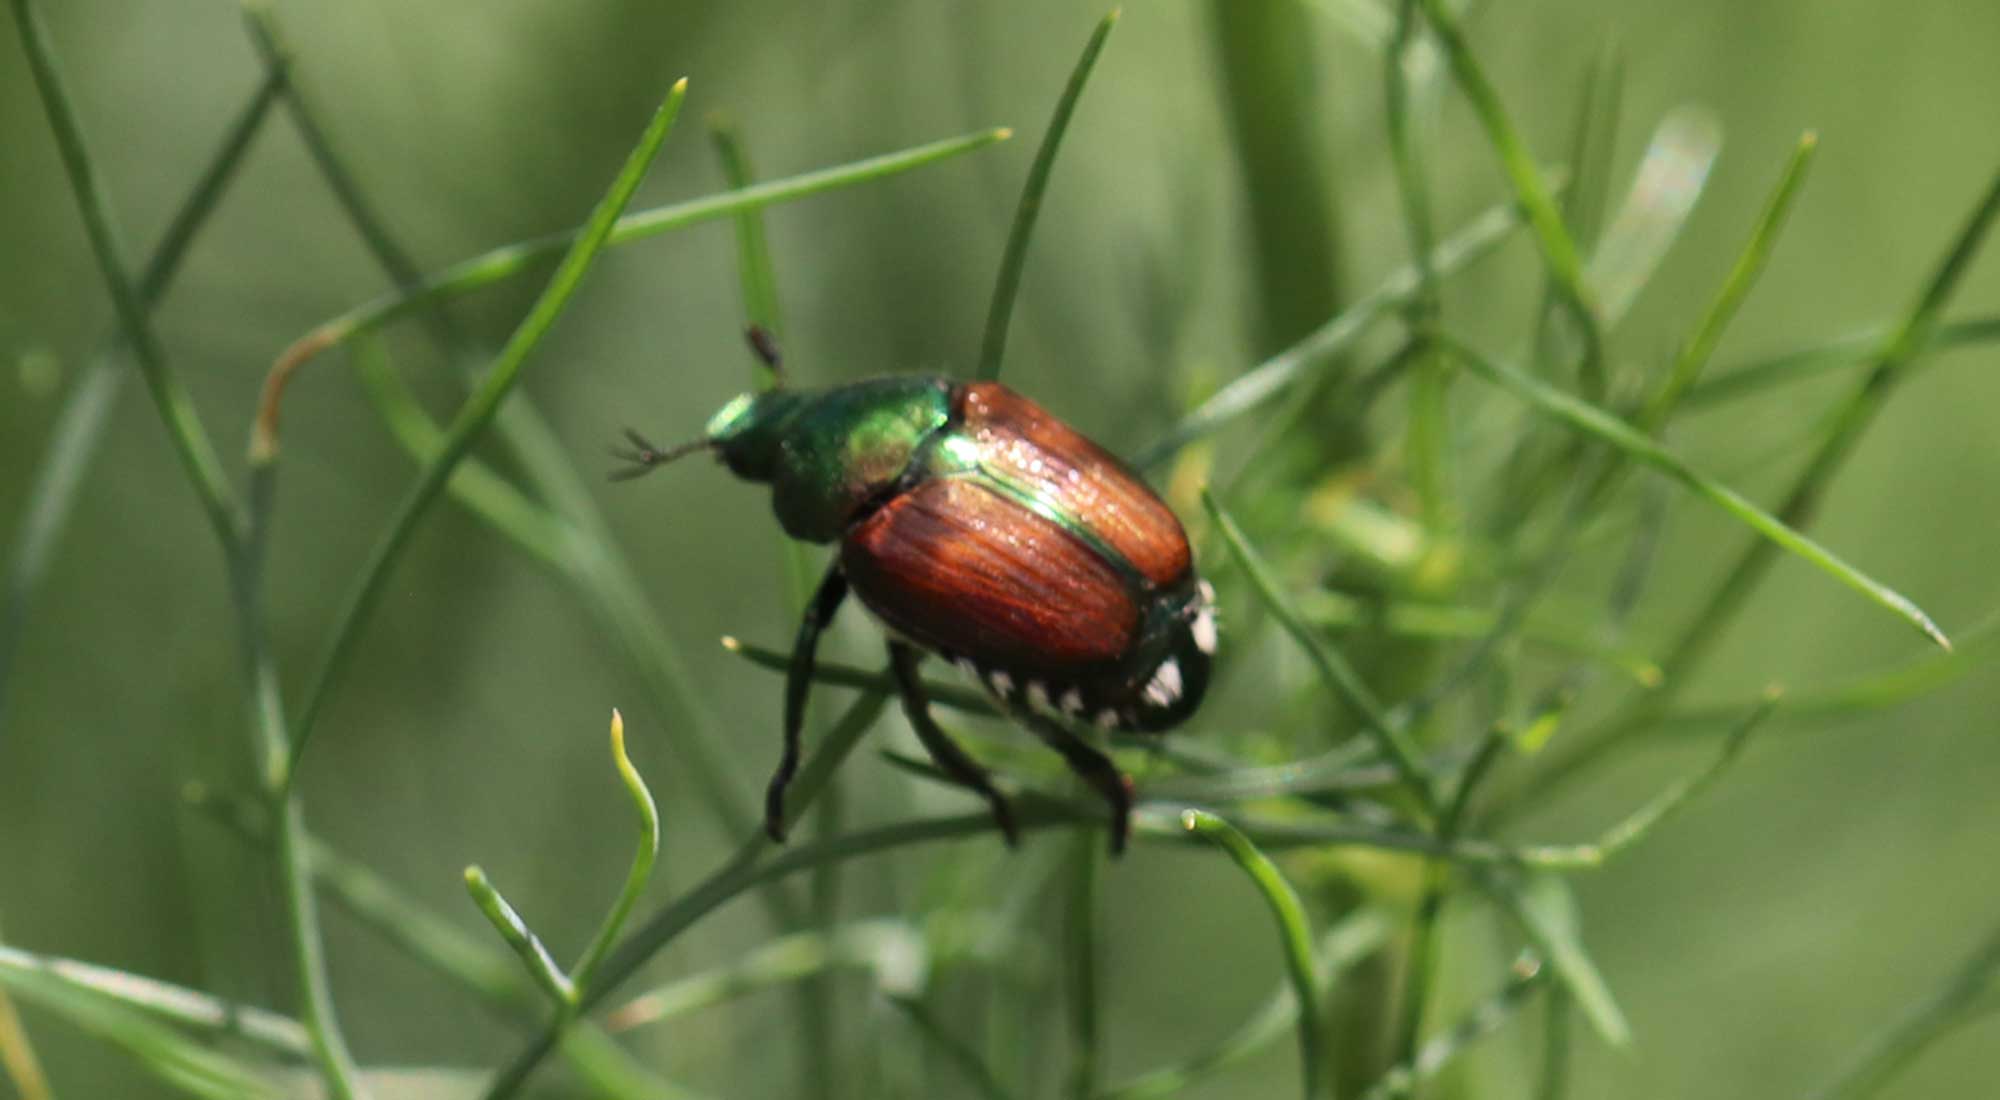 Shiny green and bronze beetle on green dill plant.